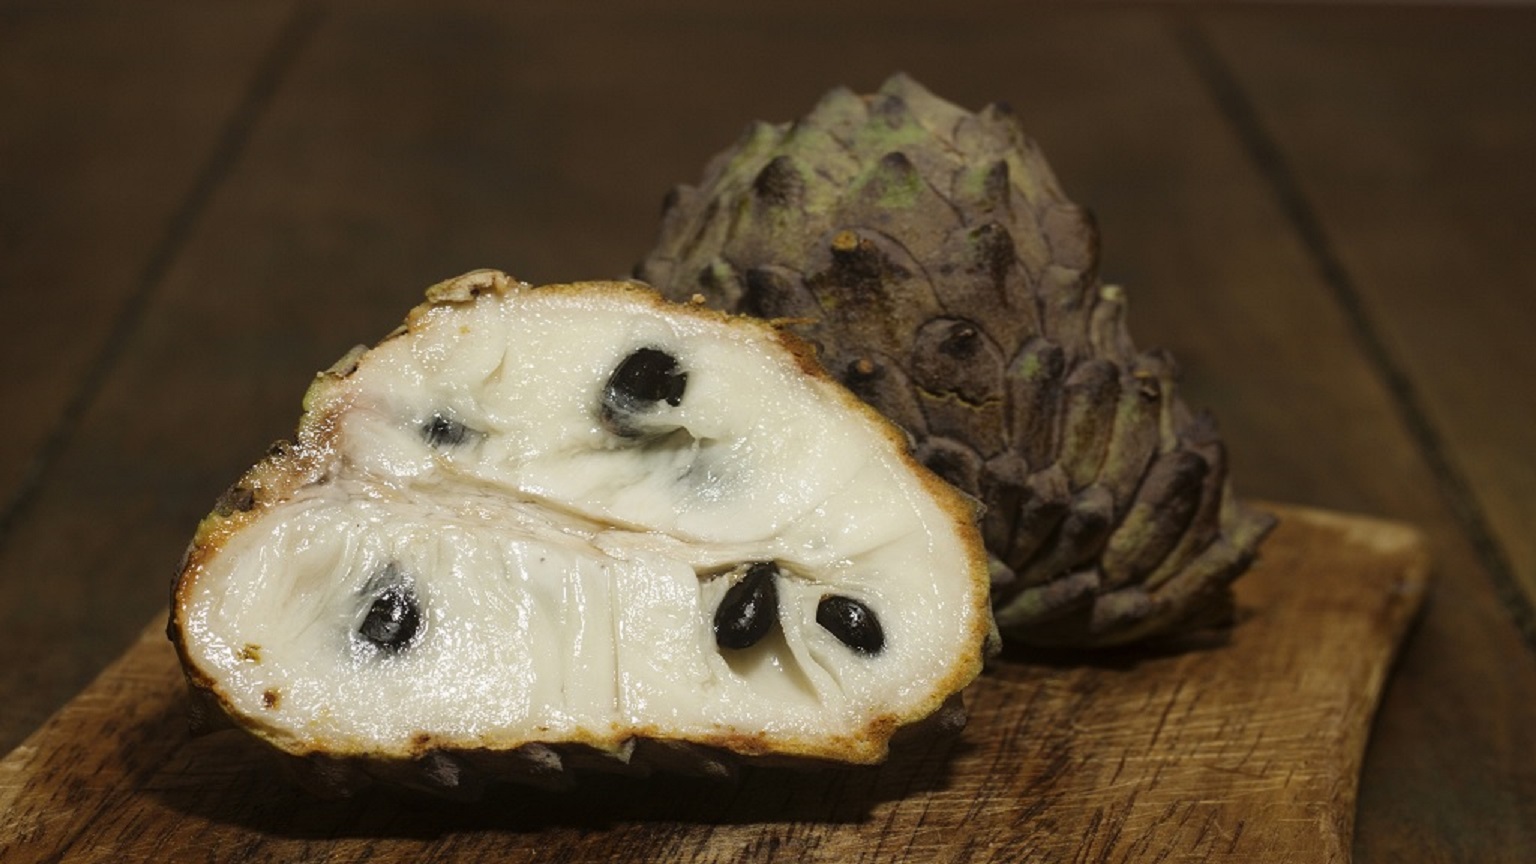 <p> Sweetsop, also known as sugar apple, is a tropical fruit with a sweet, creamy flesh that's divided into segments. The fruit is enjoyed fresh, often scooped out with a spoon, and has a unique, custard-like texture. Sweetsop is a delightful treat that offers a taste of Jamaica's tropical bounty. </p> :: Loop Jamaica